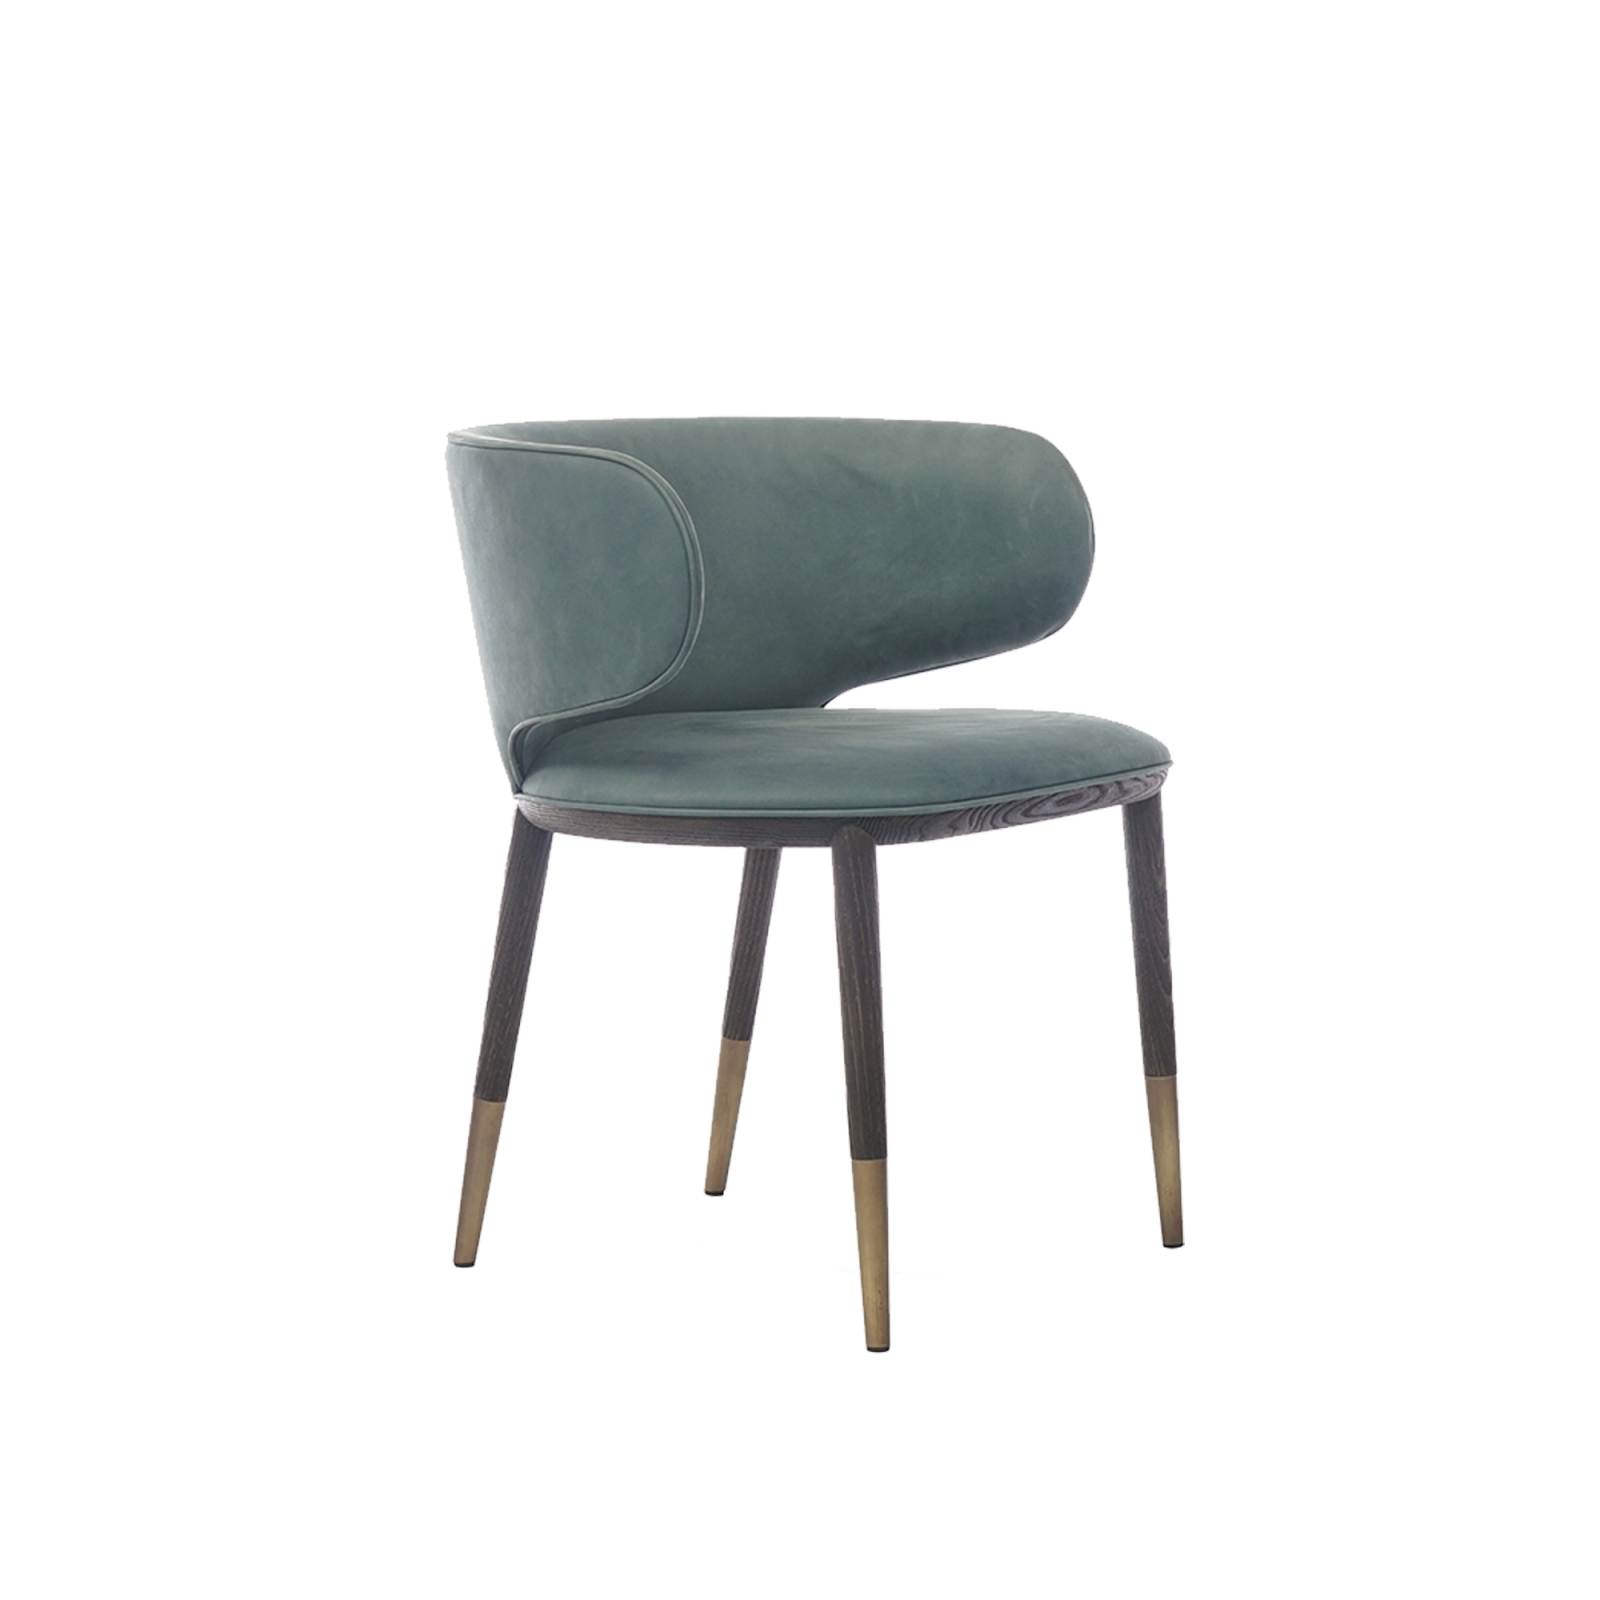 Petra  chair a with 4 legs, green and oval lines in front of a white wall